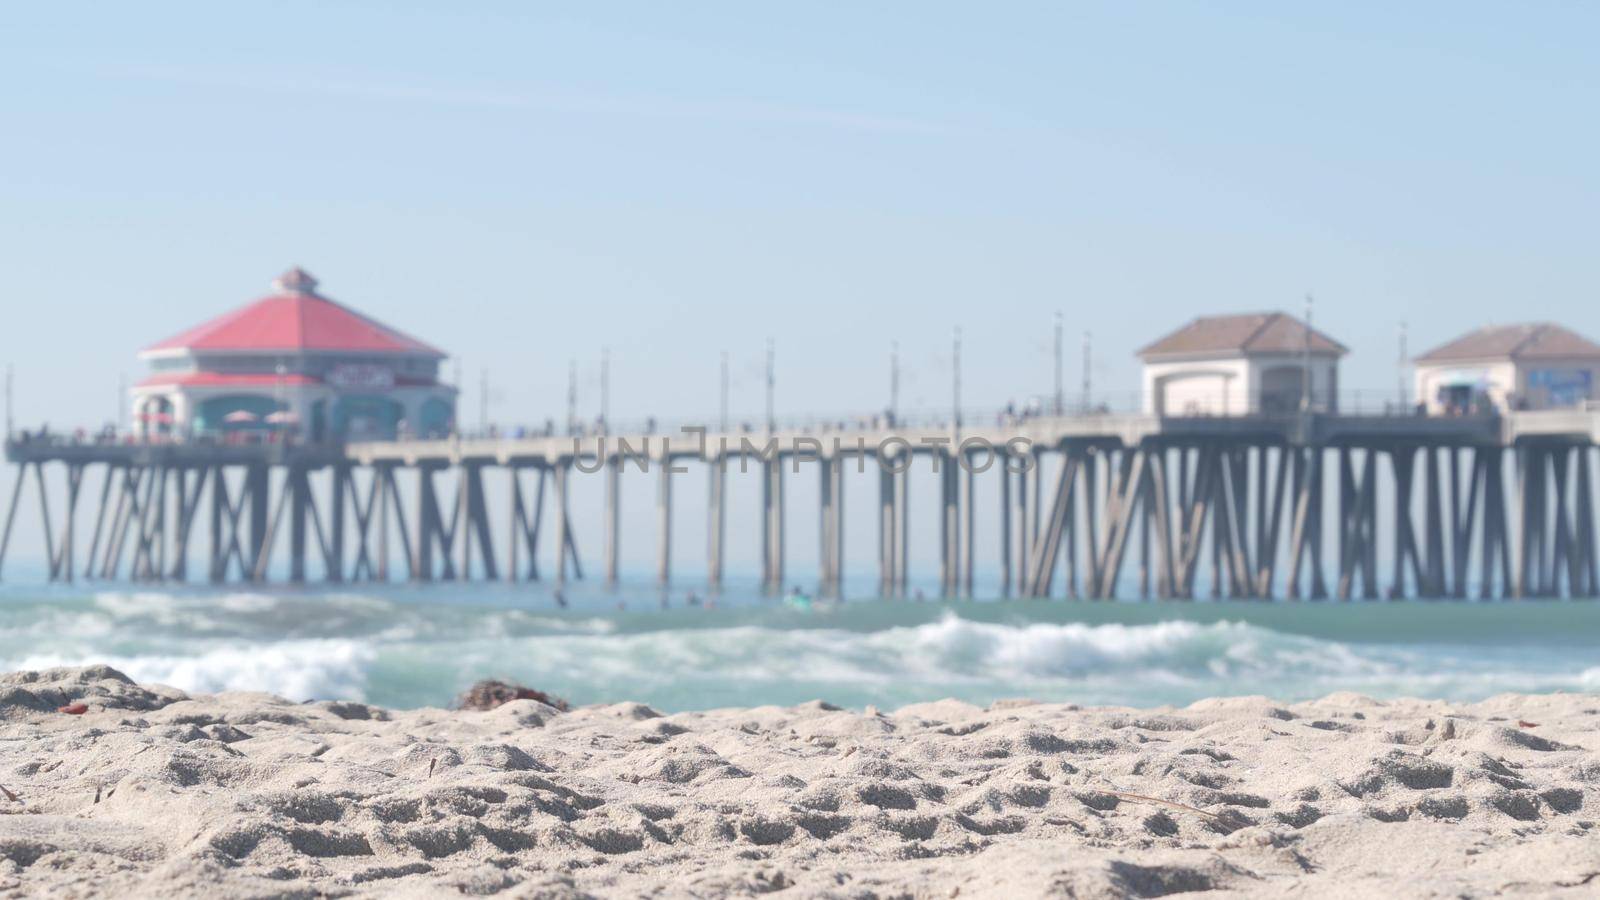 Retro huntington pier, surfing in ocean waves and sandy beach, California coast near Los Angeles, USA. American diner, sea water, beachfront boardwalk, summer vacations. Seamless looped cinemagraph.